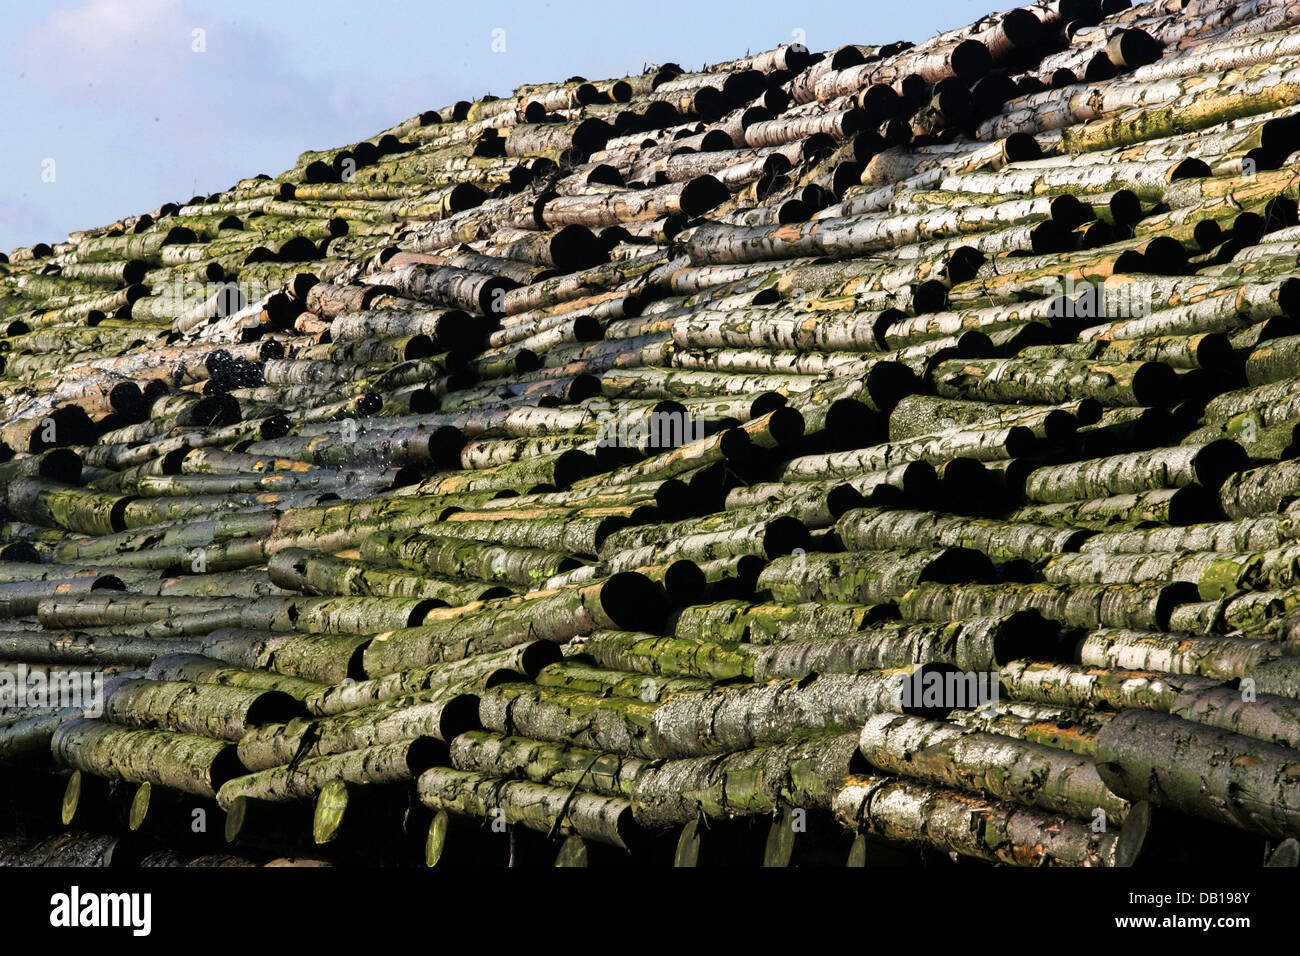 Storm damaged wood is kept at an area near the Rhine river in Duisburg, Germany, 15 November 2007. Storm Kyrill caused 15 million solid cubic metre storm damaged wood in German state North Rhine Westphalia. Photo: Roland Weihrauch Stock Photo